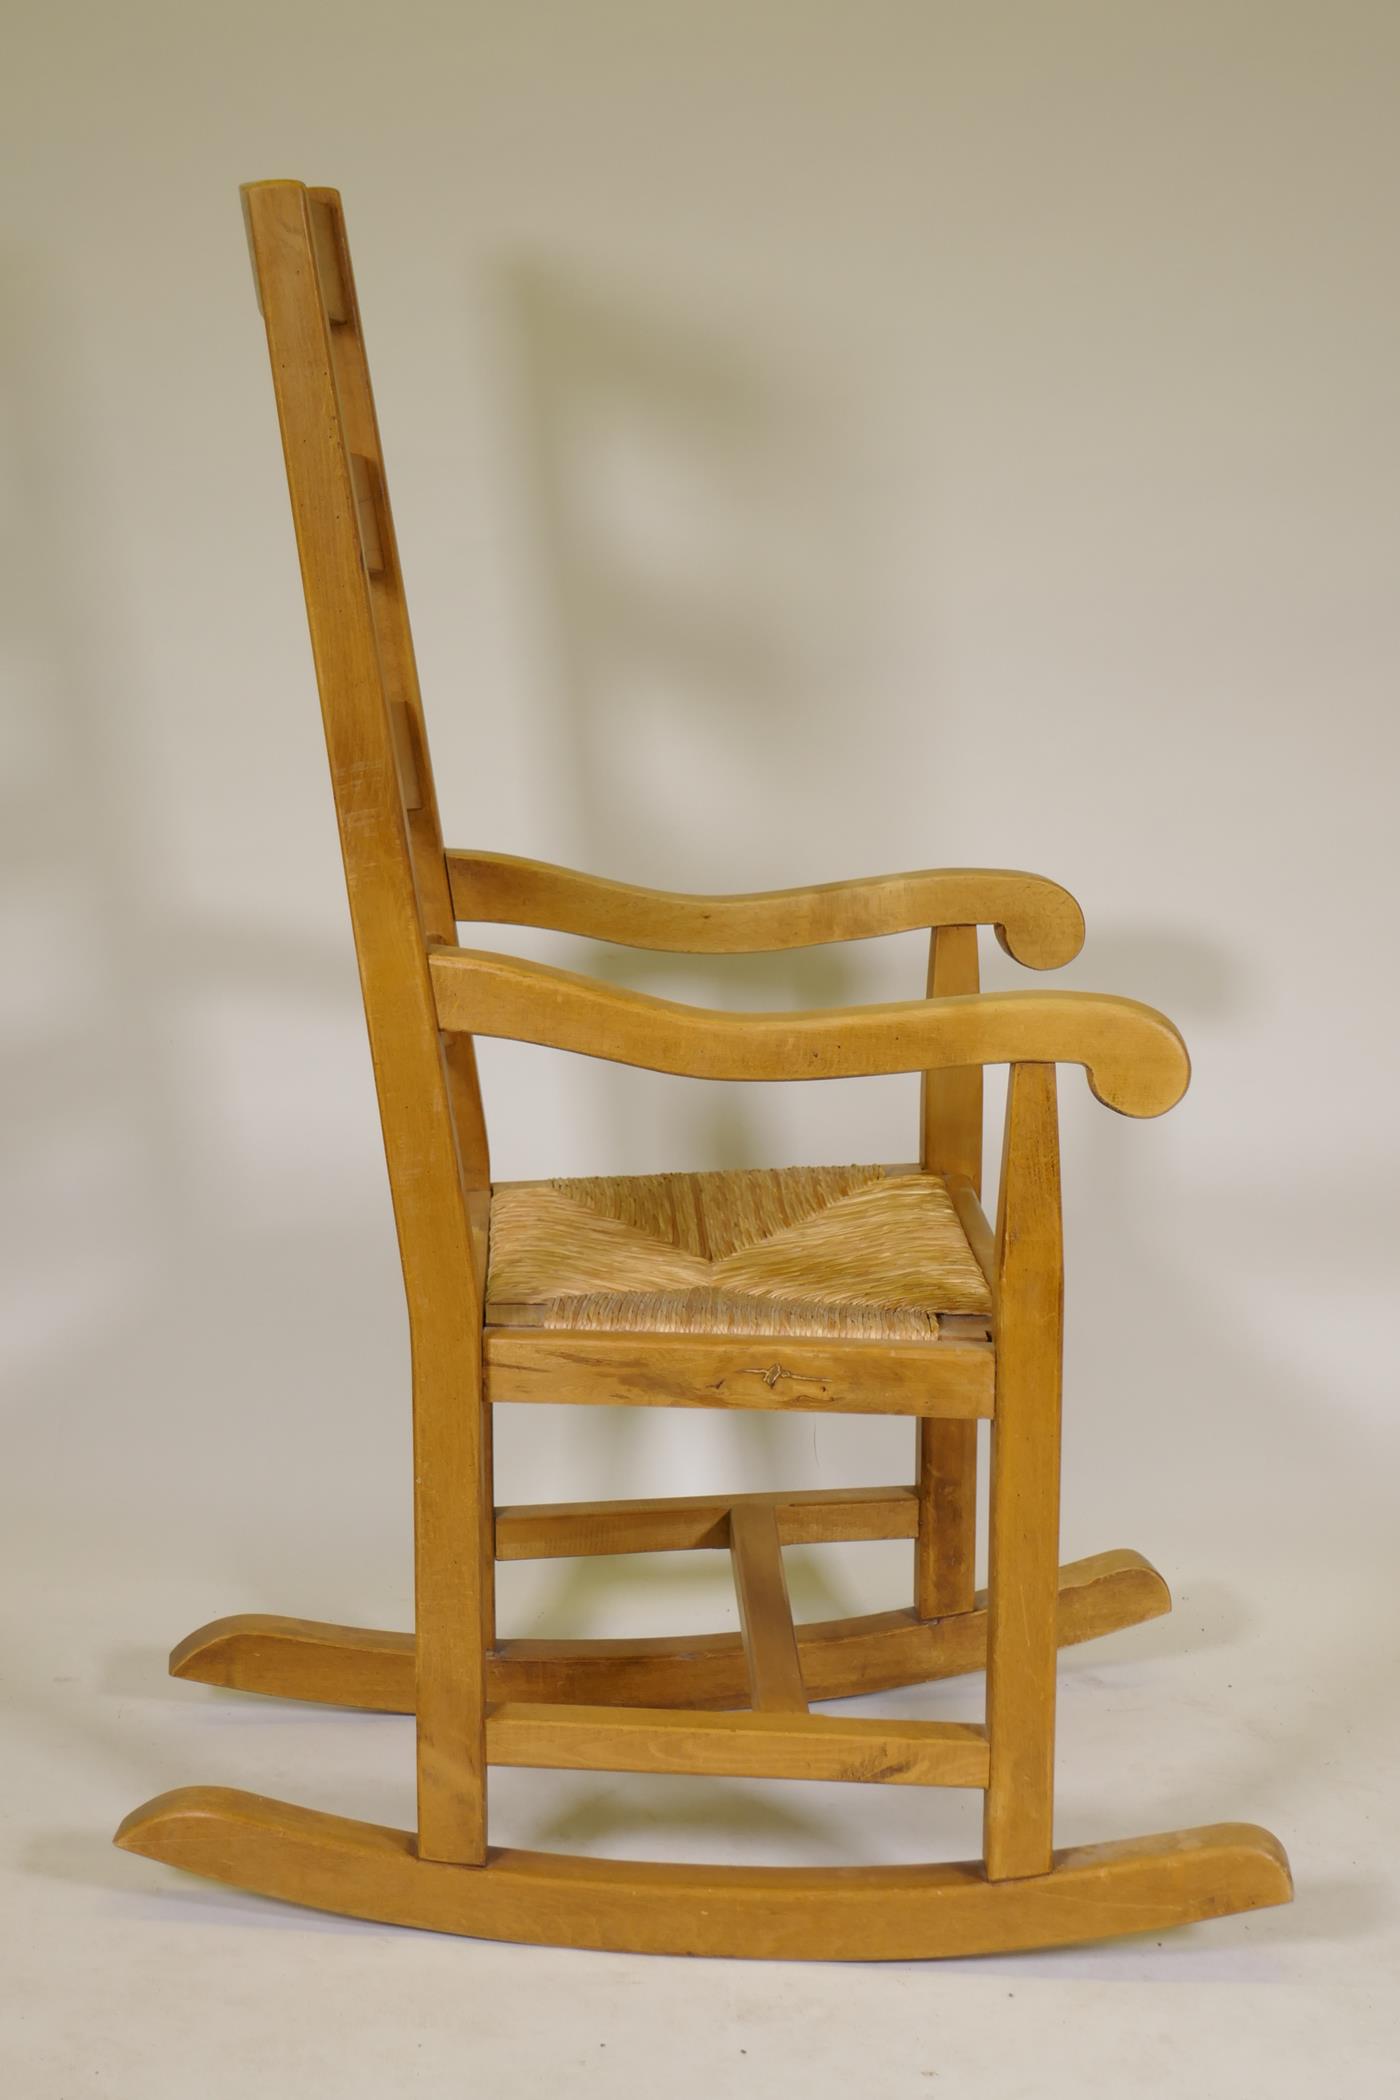 A beech wood ladderback rocking chair with rush seat - Image 4 of 4